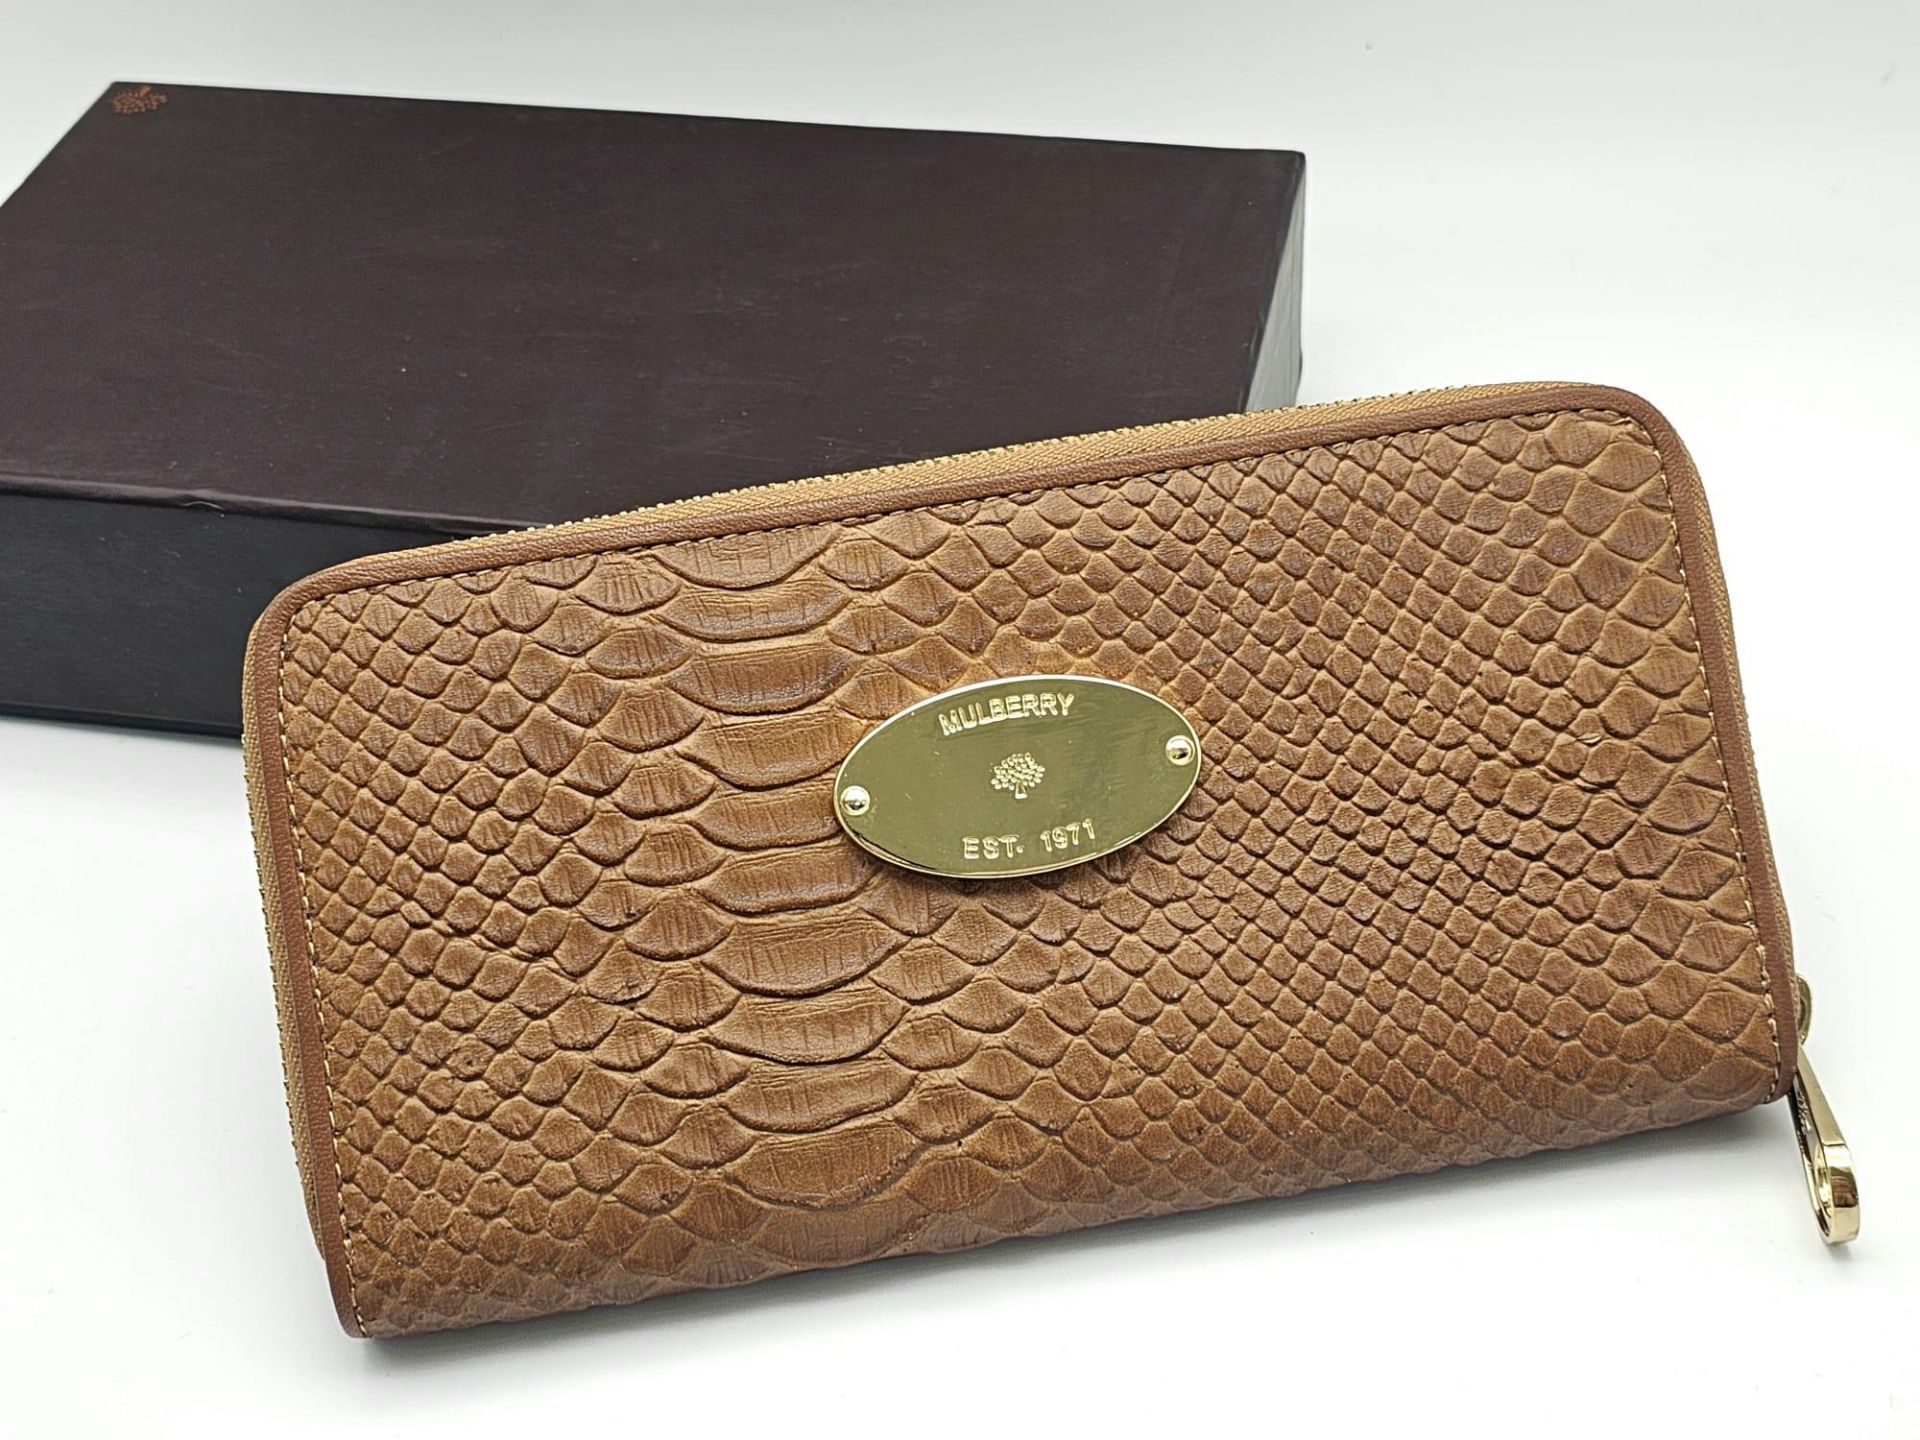 A Mulberry Brown Leather Clutch Bag/Wallet. Textured leather exterior with an inner zipped